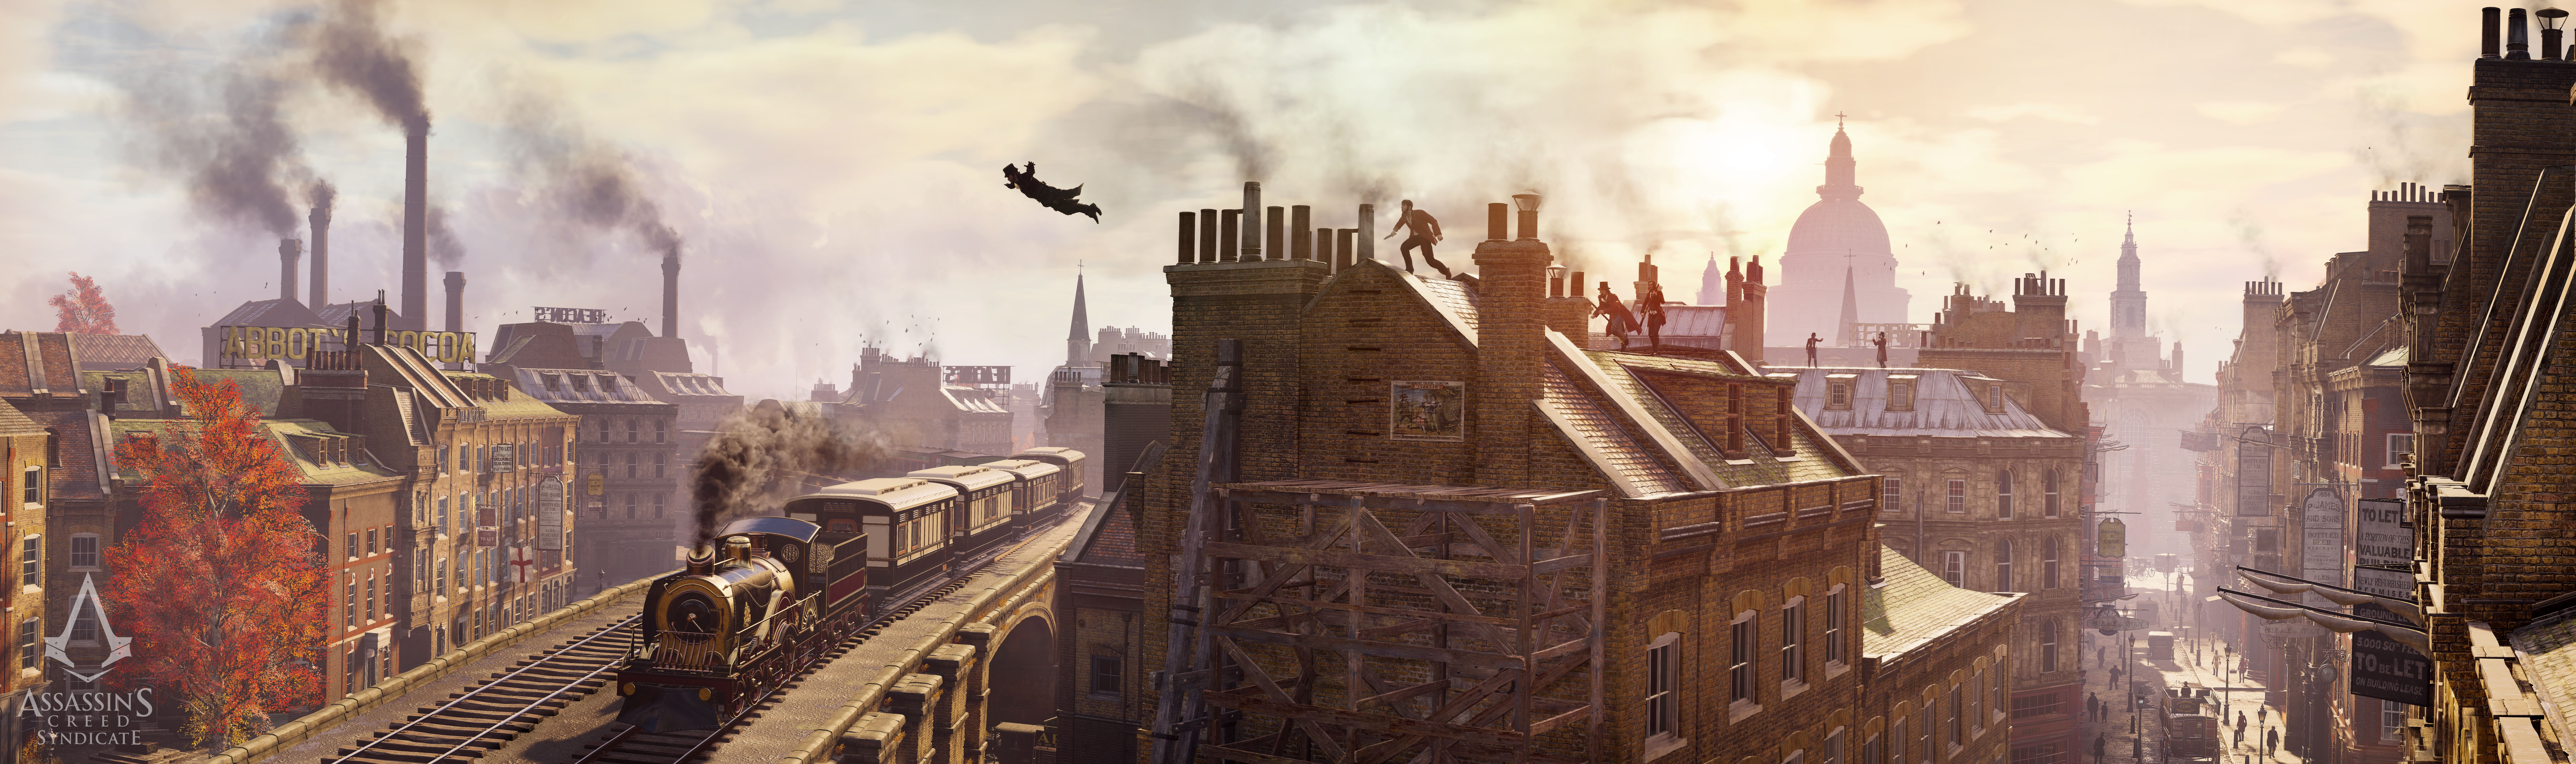 video game, assassin's creed: syndicate, train, assassin's creed